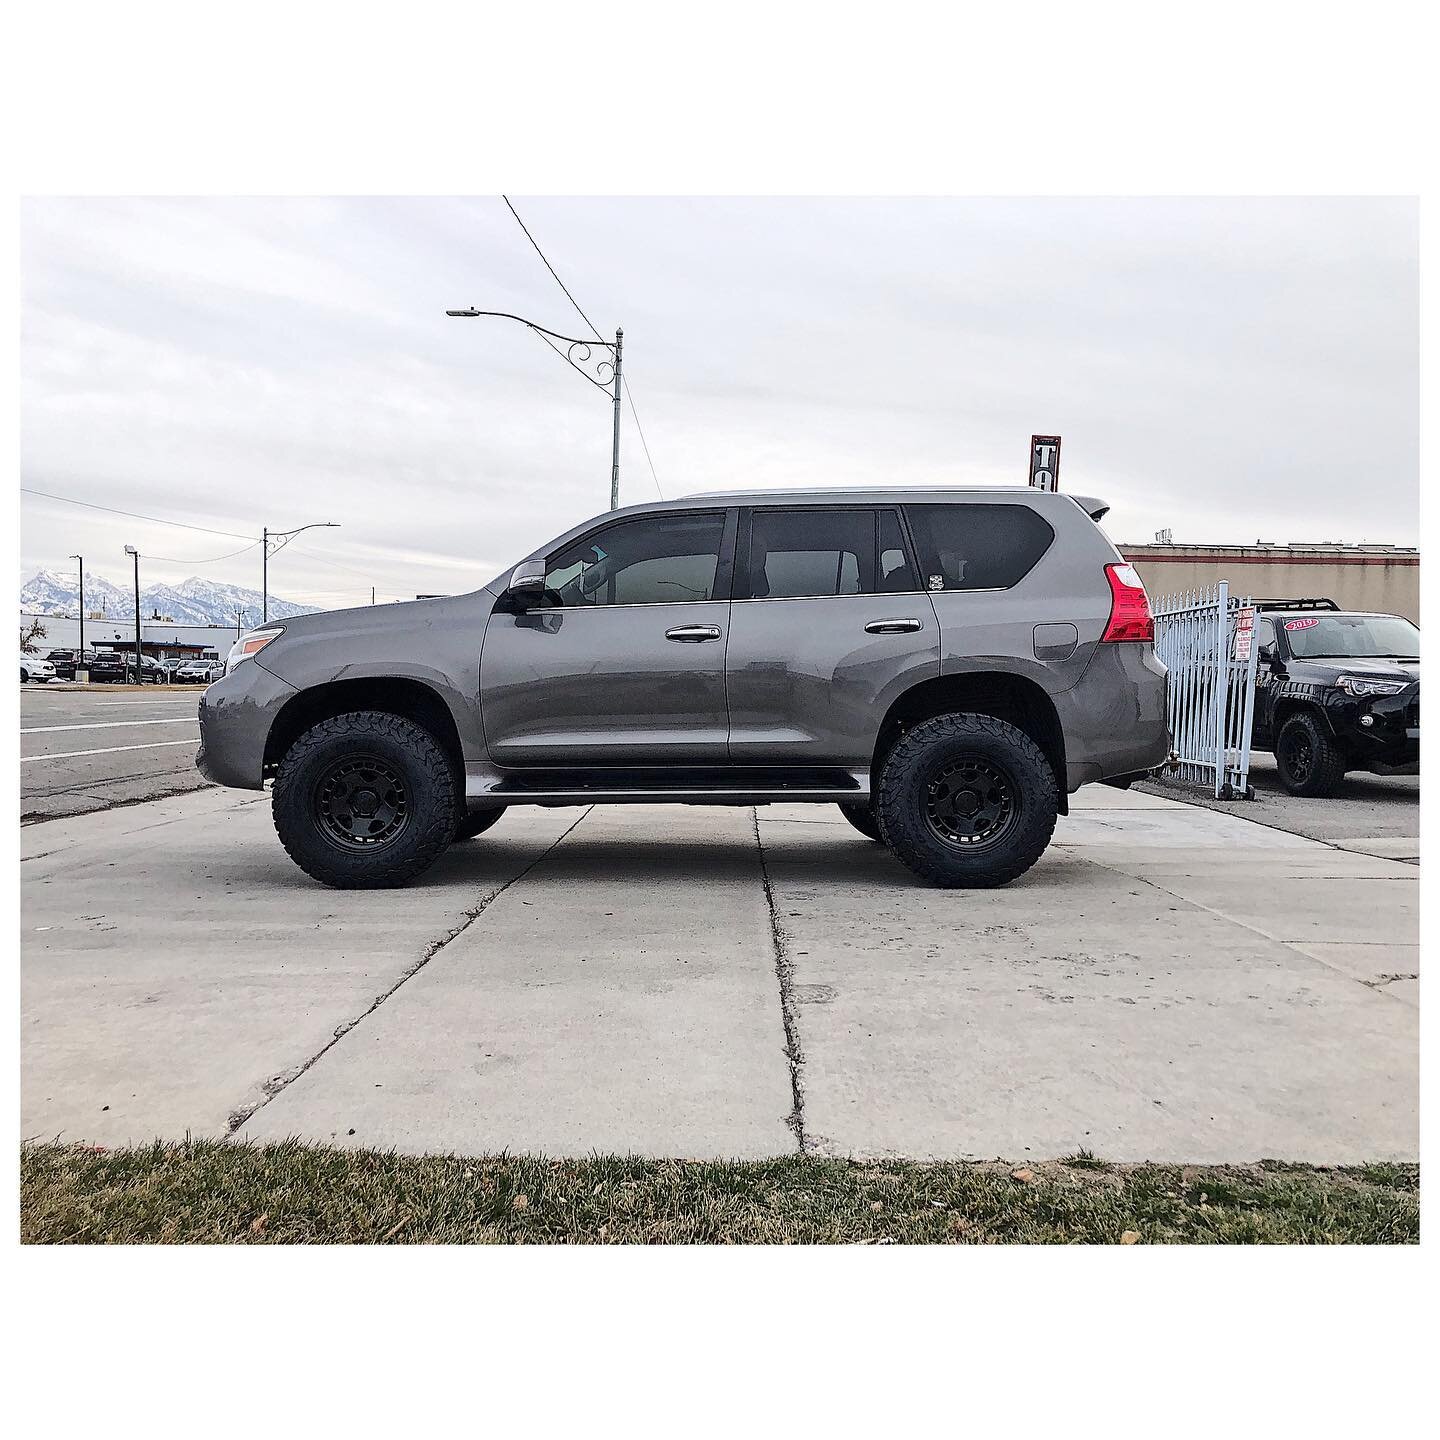 Found this GX for a friend and his wife. It&rsquo;s &ldquo;actually&rdquo; his wife&rsquo;s rig. 😂 Added an old man emu lift with some BFG ko2 tires, along with some Fifteen52 Turbomac HD wheels.  These GX&rsquo;s look WAY better lifted with some wh